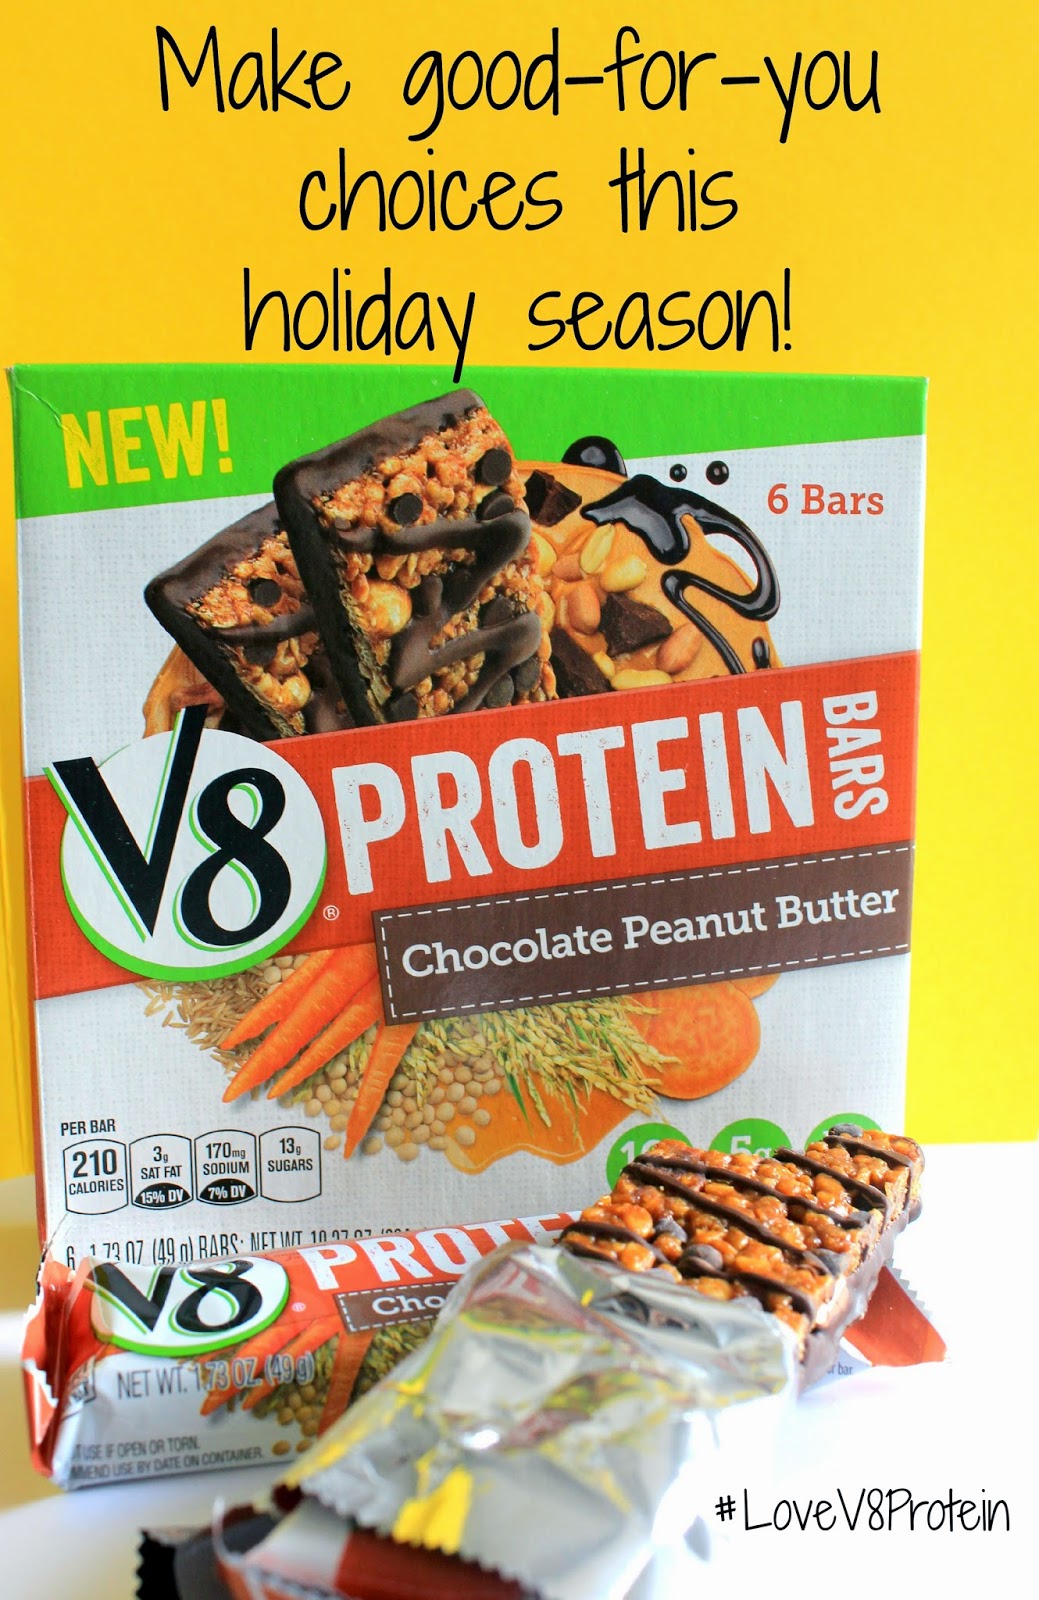 Make good-for-you choices this holiday season with the new Campbell's V8 Protein shakes and bars! #LoveV8Protein #ad